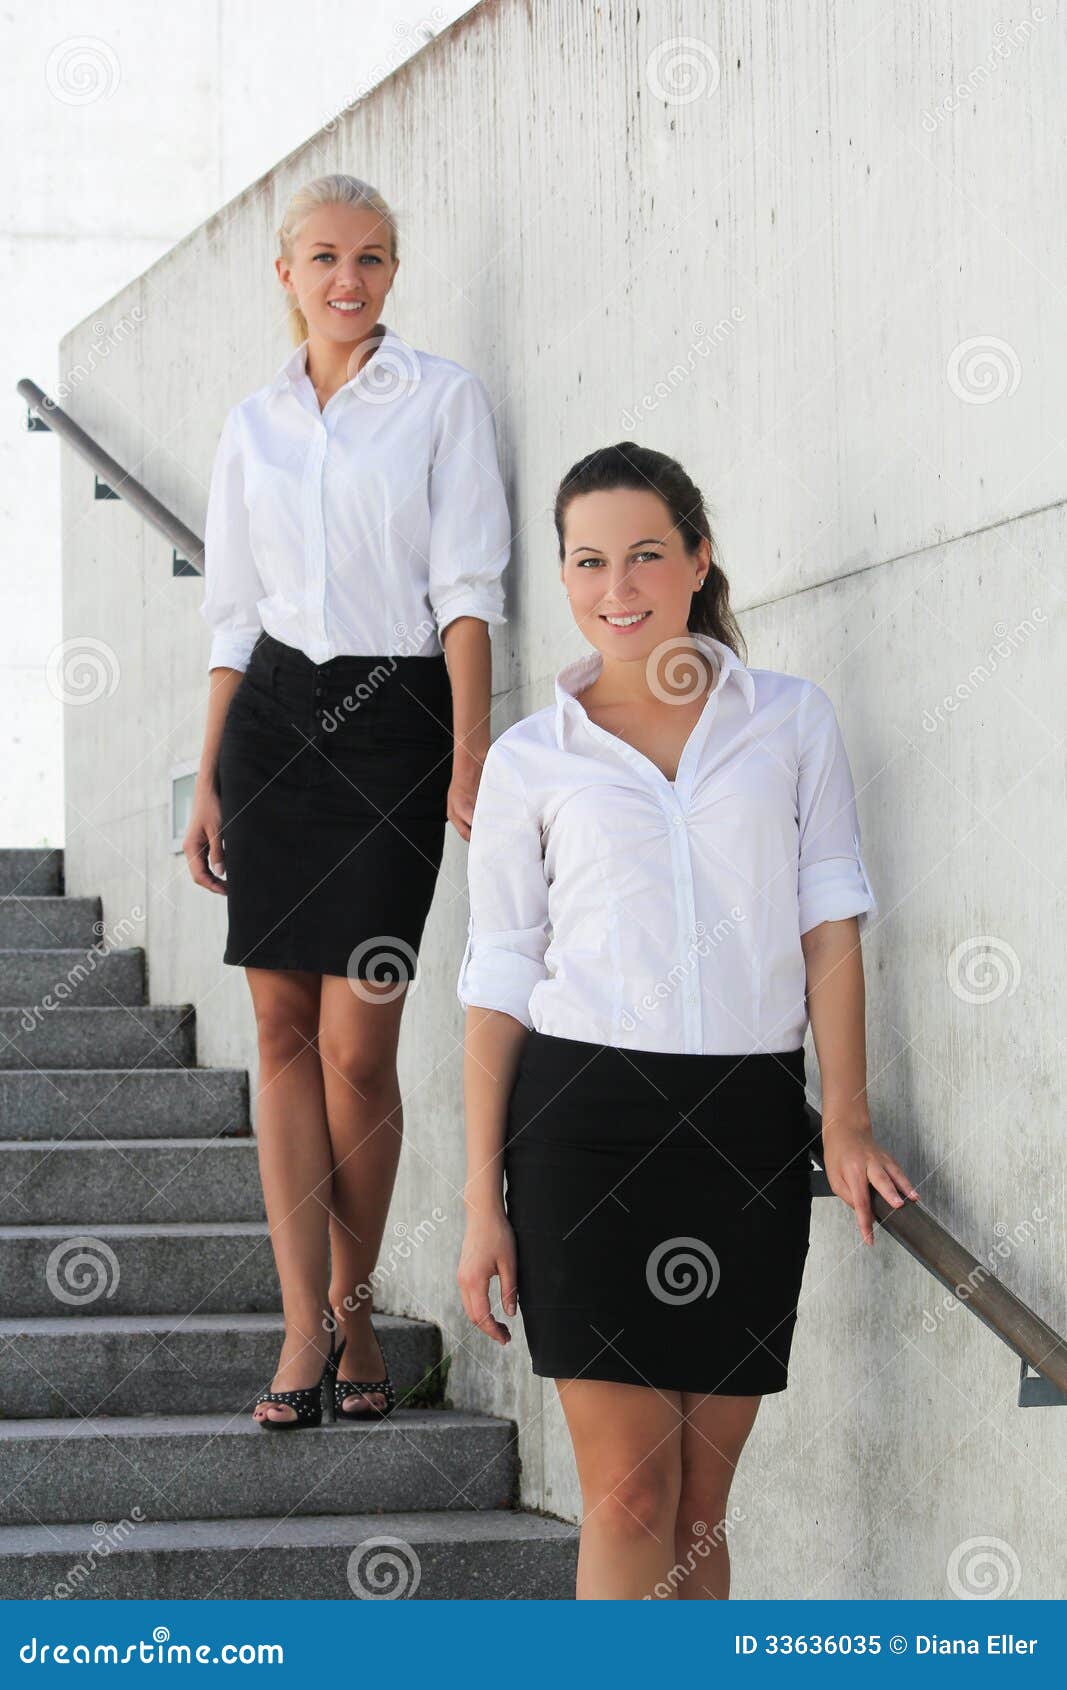 Two Young Business Women Posing on Stairs Stock Image - Image of ...